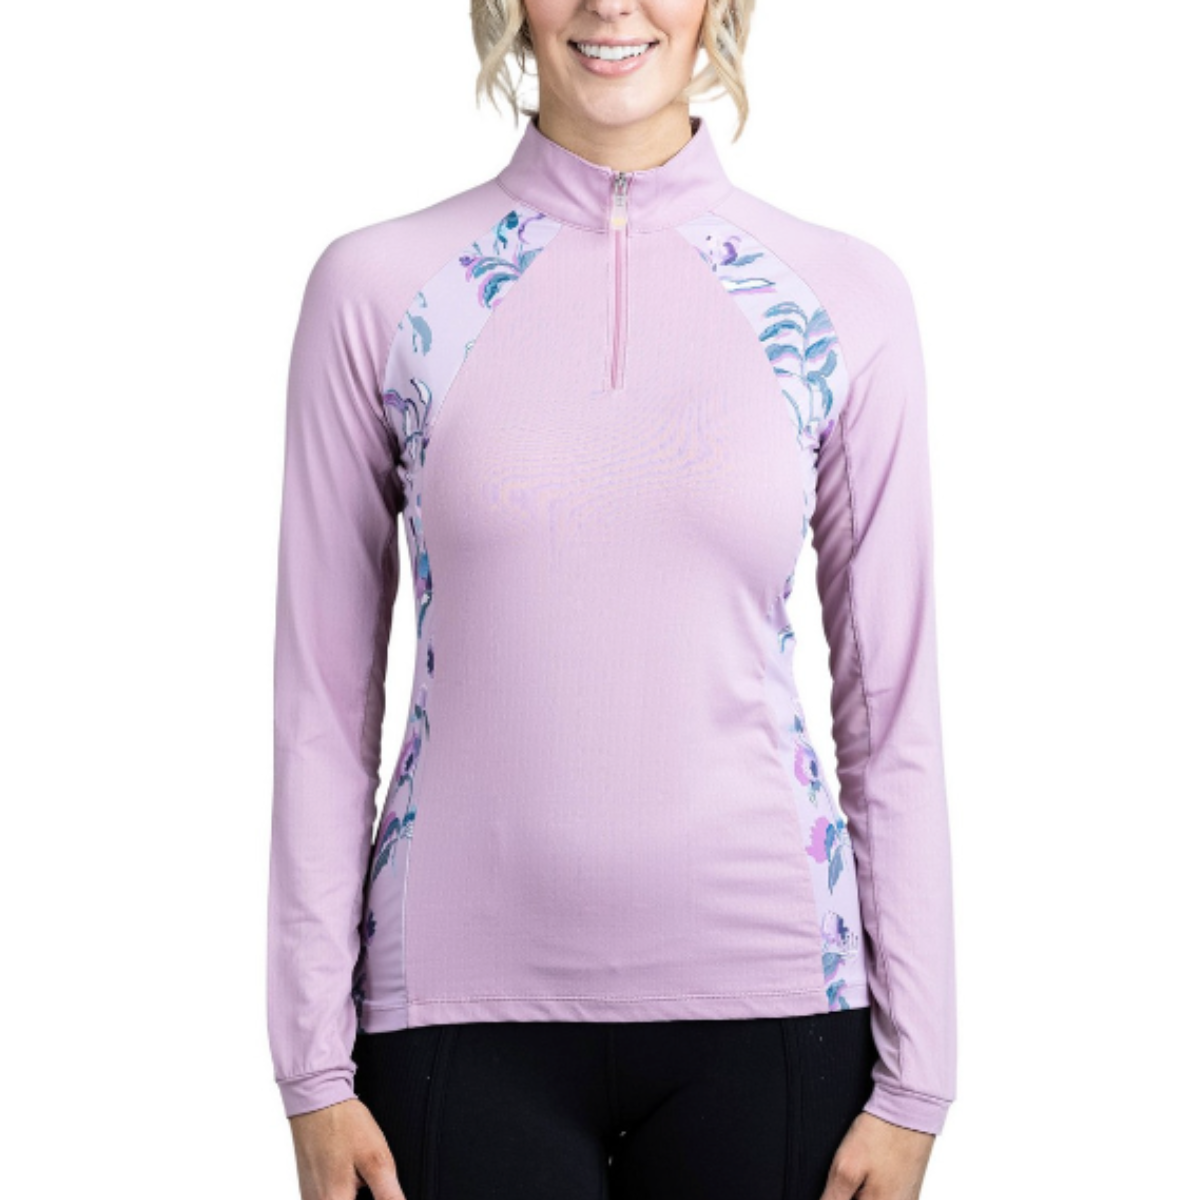 Kastel 1/4 Zip Long Sleeve Shirt in Lilac Solid with Fleur Accent